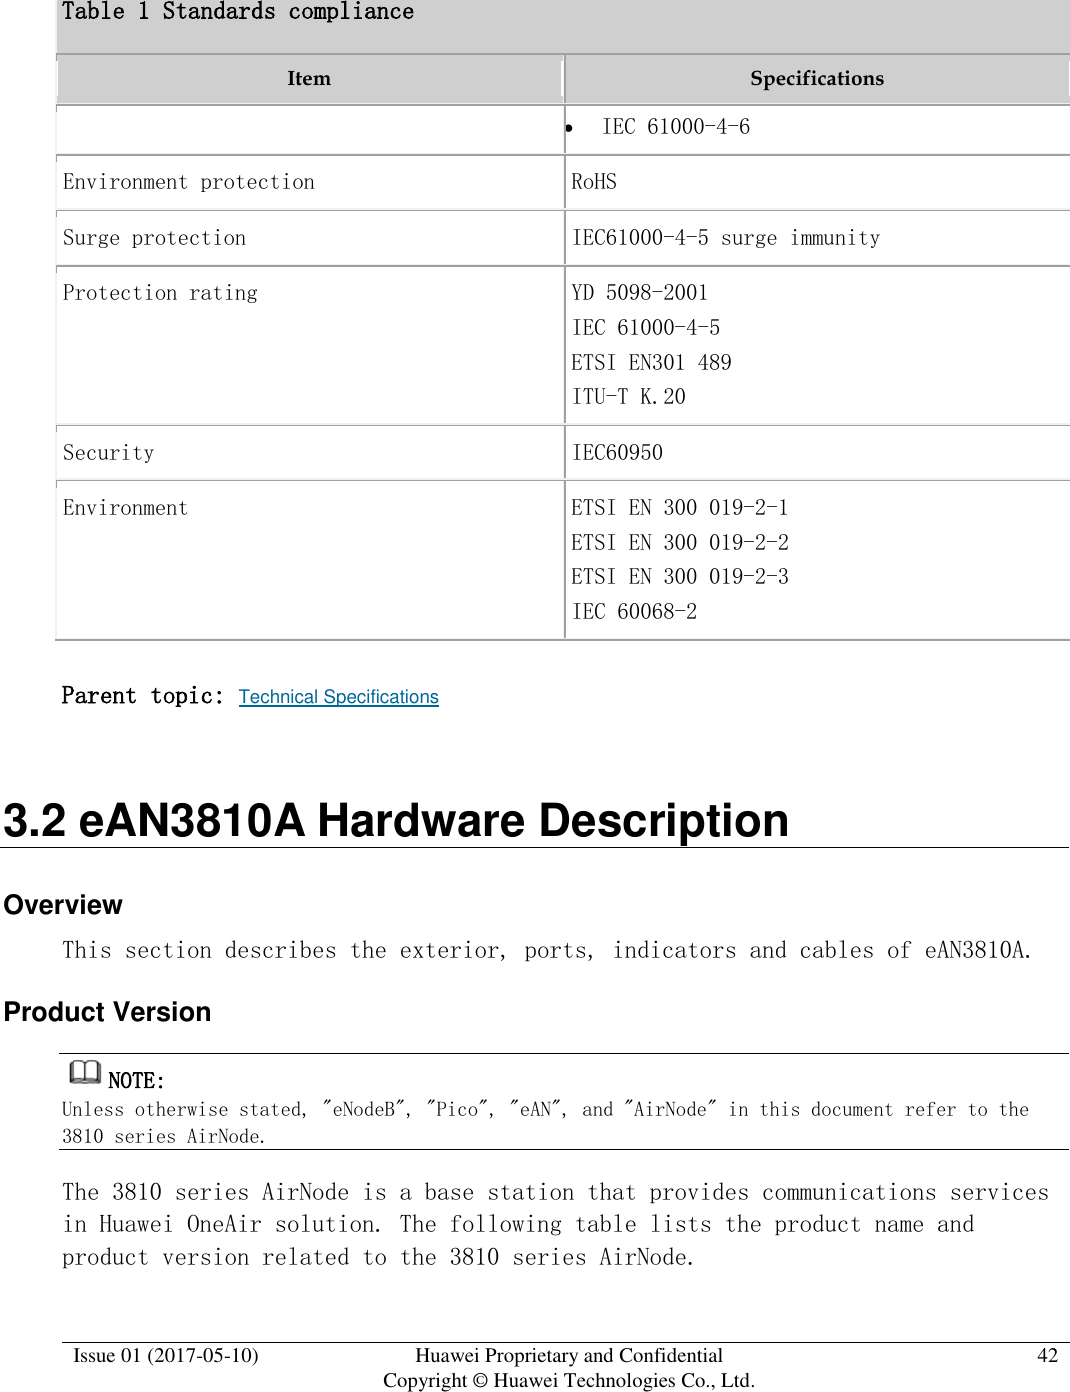  Issue 01 (2017-05-10) Huawei Proprietary and Confidential      Copyright © Huawei Technologies Co., Ltd. 42  Table 1 Standards compliance Item Specifications  IEC 61000-4-6 Environment protection RoHS Surge protection IEC61000-4-5 surge immunity Protection rating YD 5098-2001 IEC 61000-4-5 ETSI EN301 489 ITU-T K.20 Security IEC60950 Environment ETSI EN 300 019-2-1 ETSI EN 300 019-2-2 ETSI EN 300 019-2-3 IEC 60068-2 Parent topic: Technical Specifications 3.2 eAN3810A Hardware Description Overview This section describes the exterior, ports, indicators and cables of eAN3810A. Product Version NOTE:  Unless otherwise stated, &quot;eNodeB&quot;, &quot;Pico&quot;, &quot;eAN&quot;, and &quot;AirNode&quot; in this document refer to the 3810 series AirNode.  The 3810 series AirNode is a base station that provides communications services in Huawei OneAir solution. The following table lists the product name and product version related to the 3810 series AirNode.  